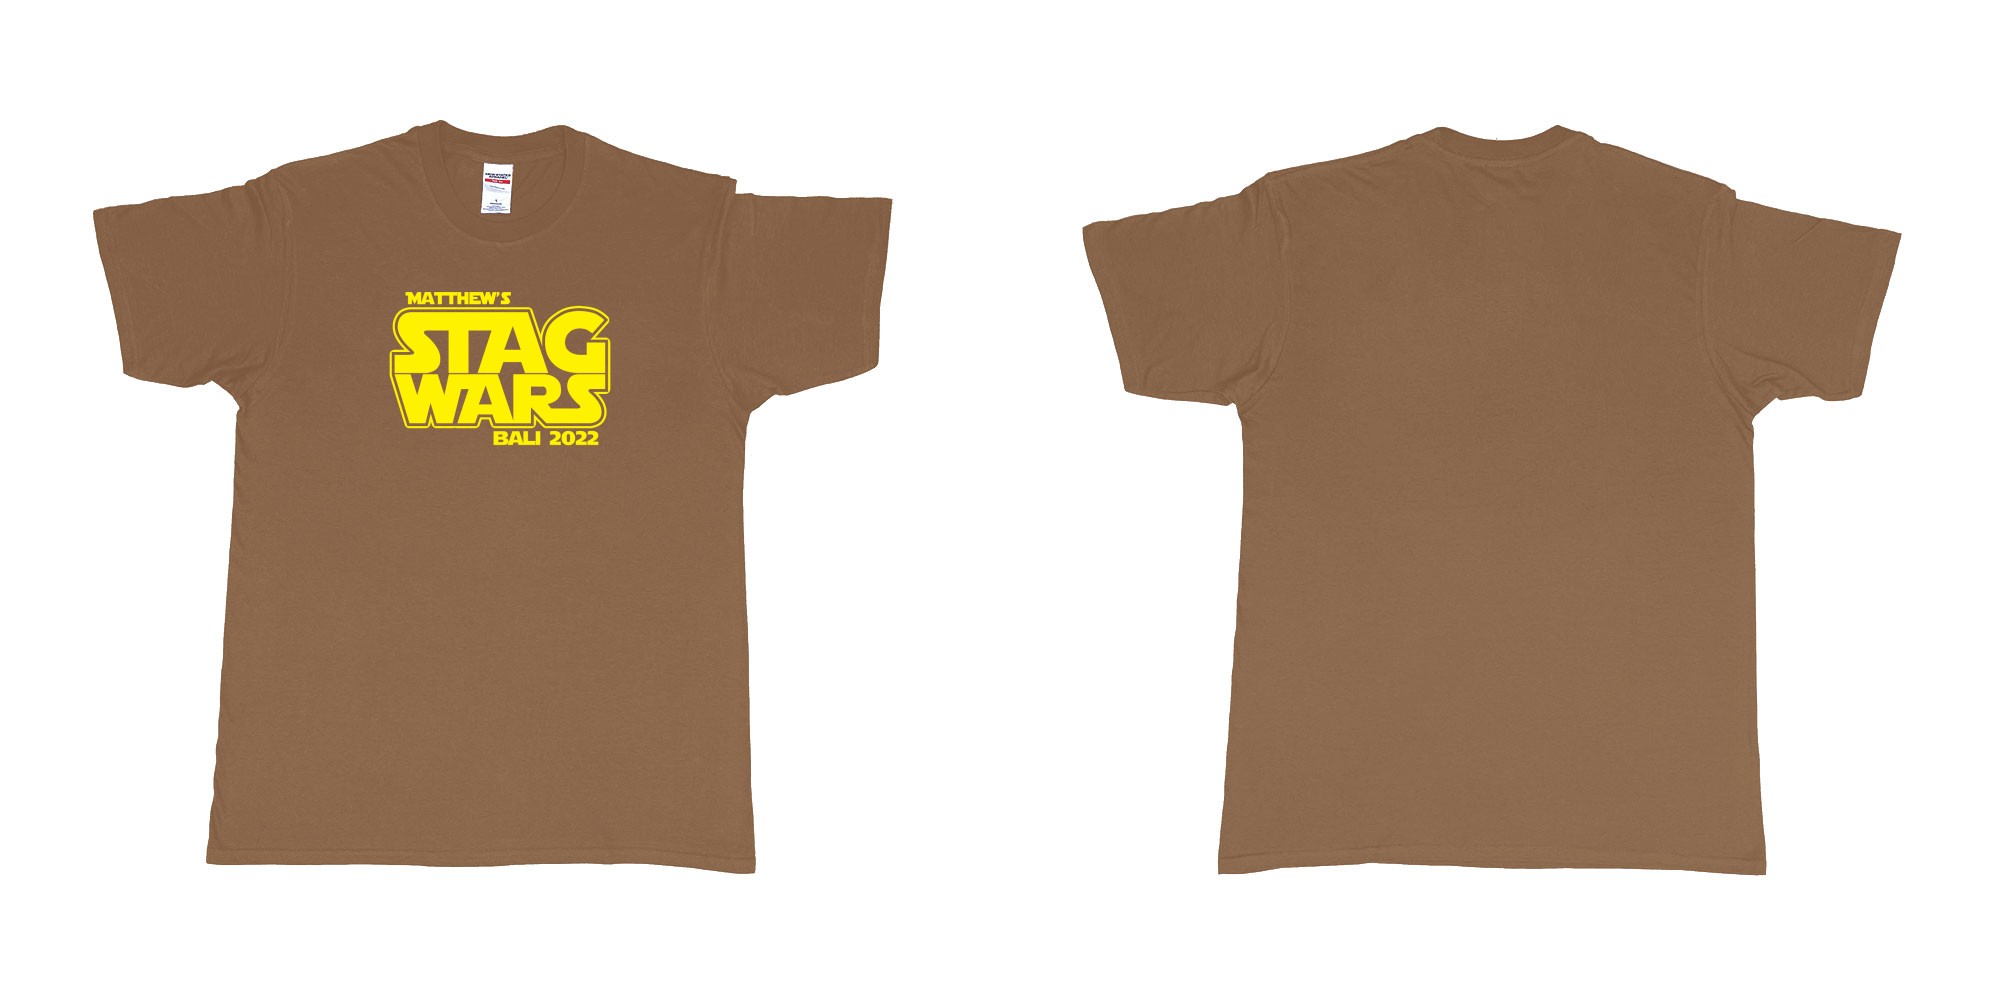 Custom tshirt design TPW Star Wars Stag in fabric color chestnut choice your own text made in Bali by The Pirate Way